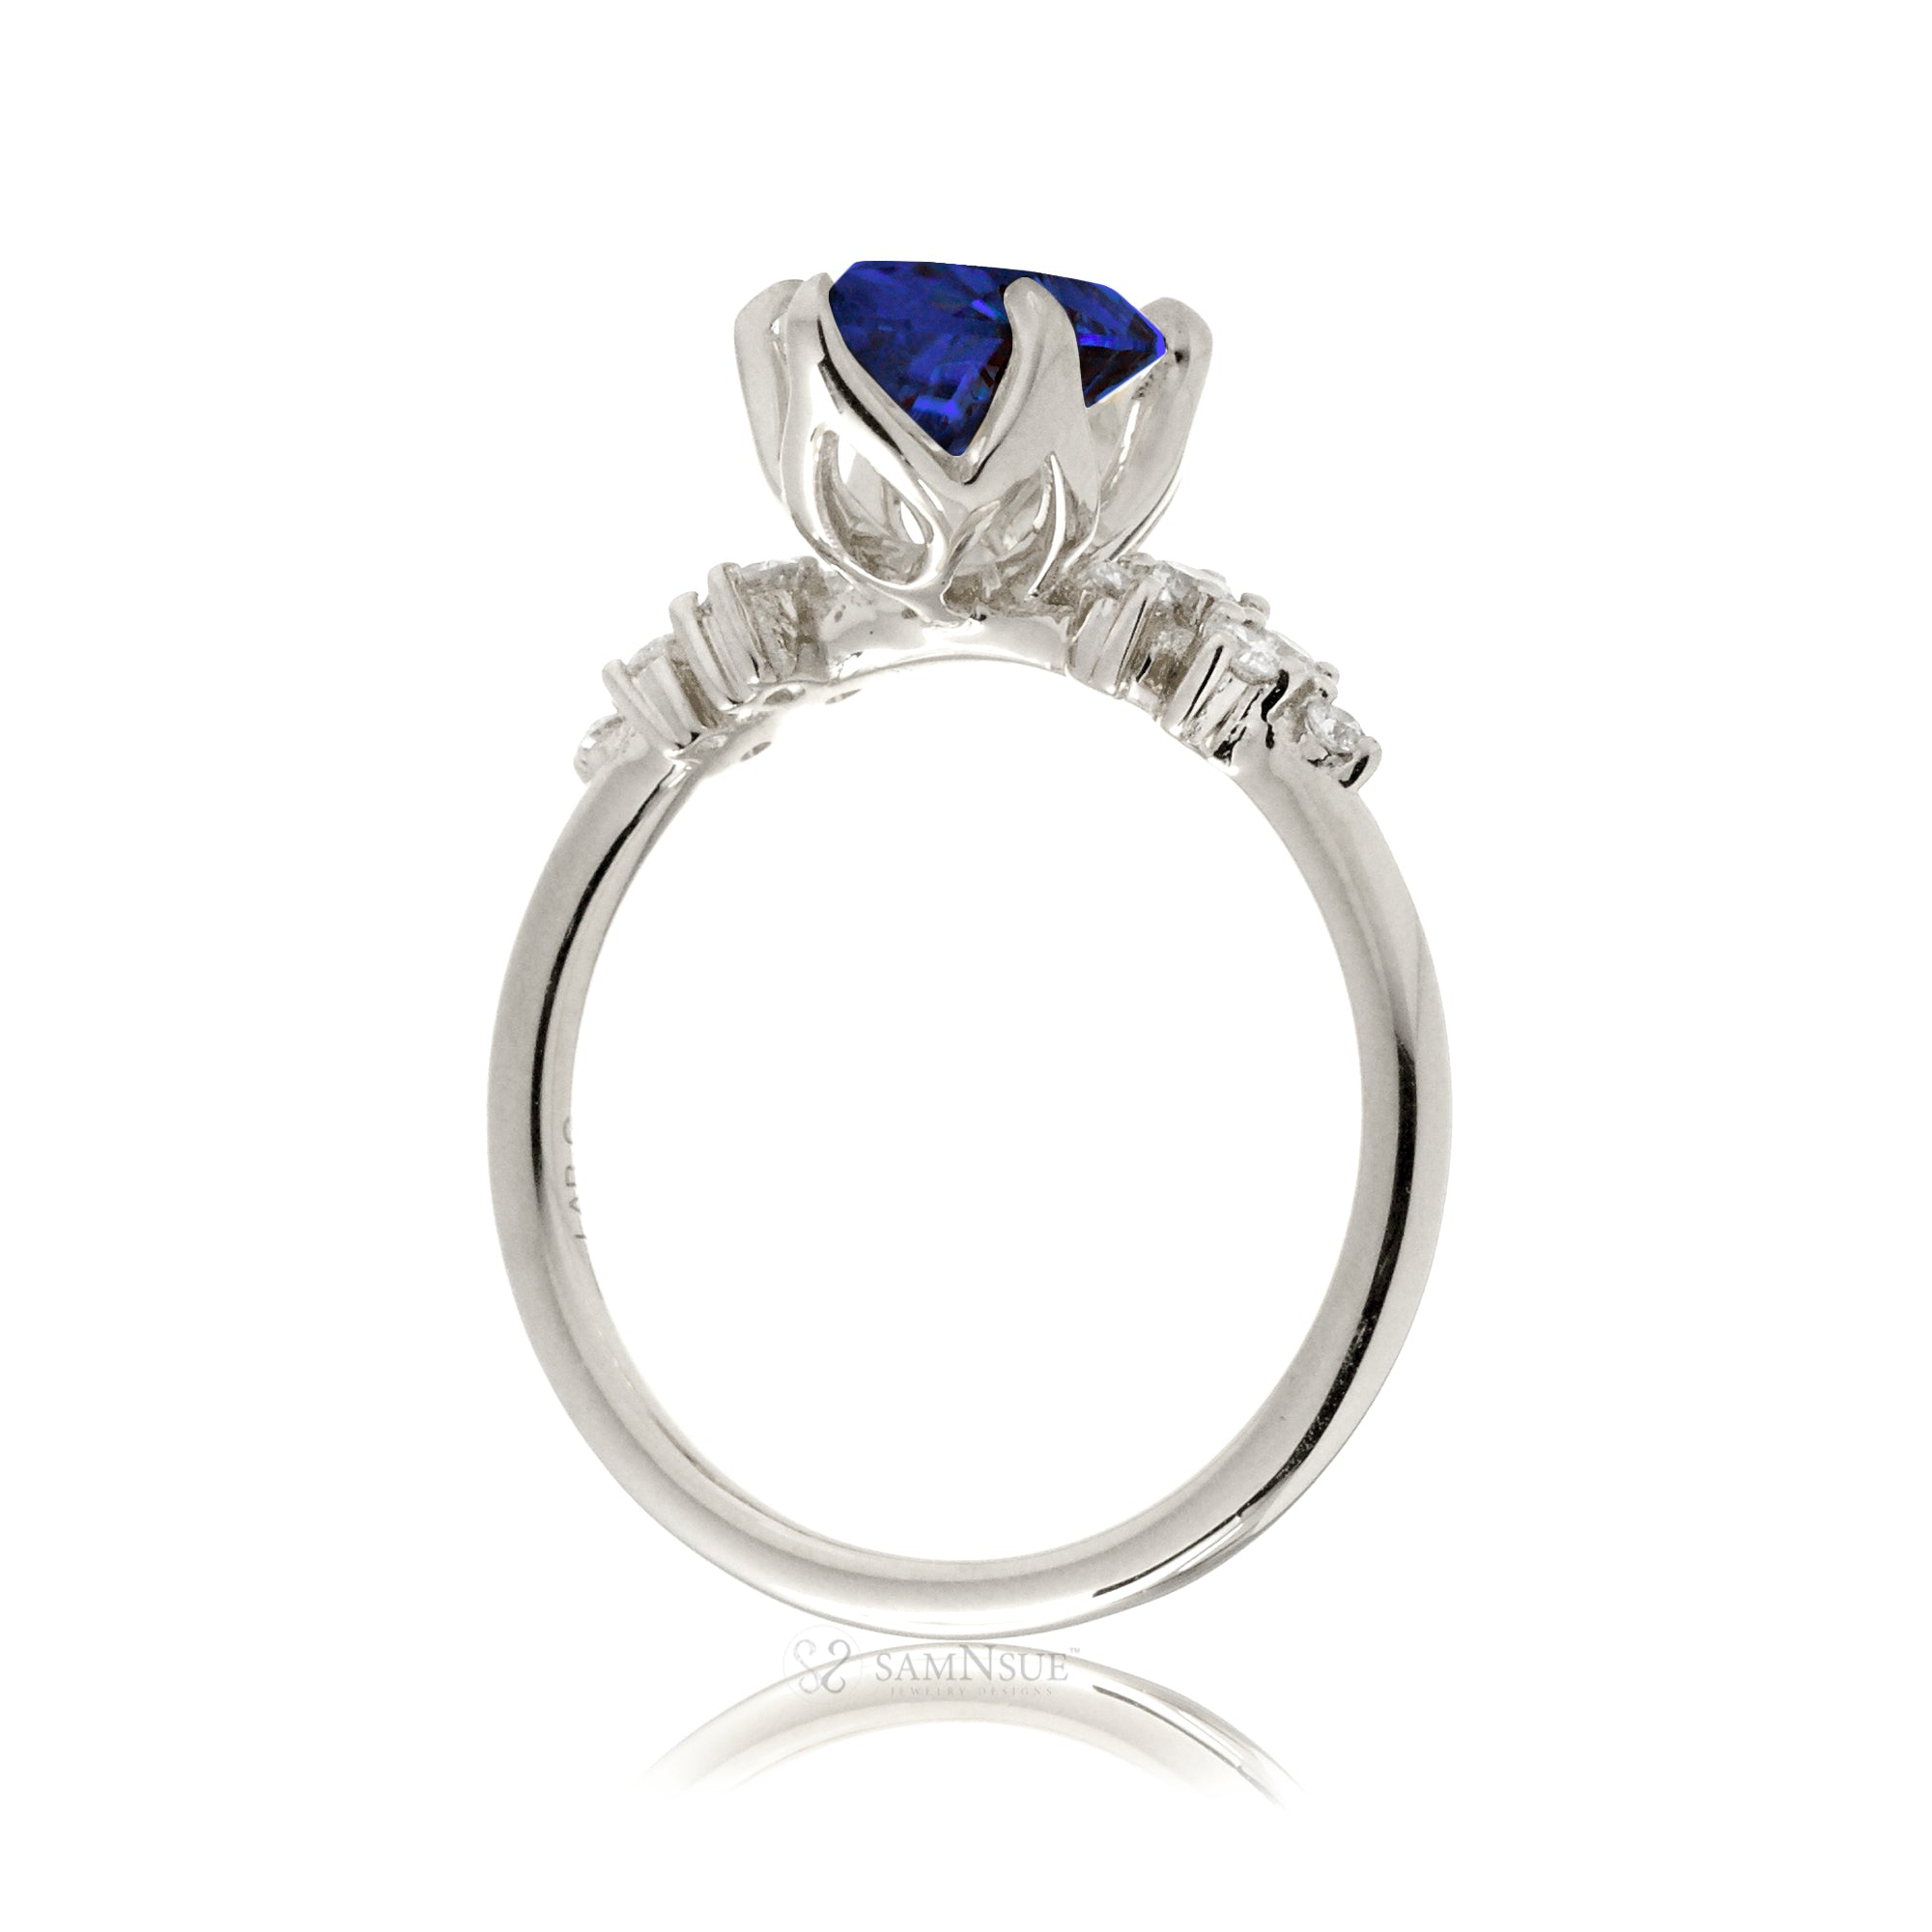 Blue sapphire oval cut solitaire engagement ring in white gold